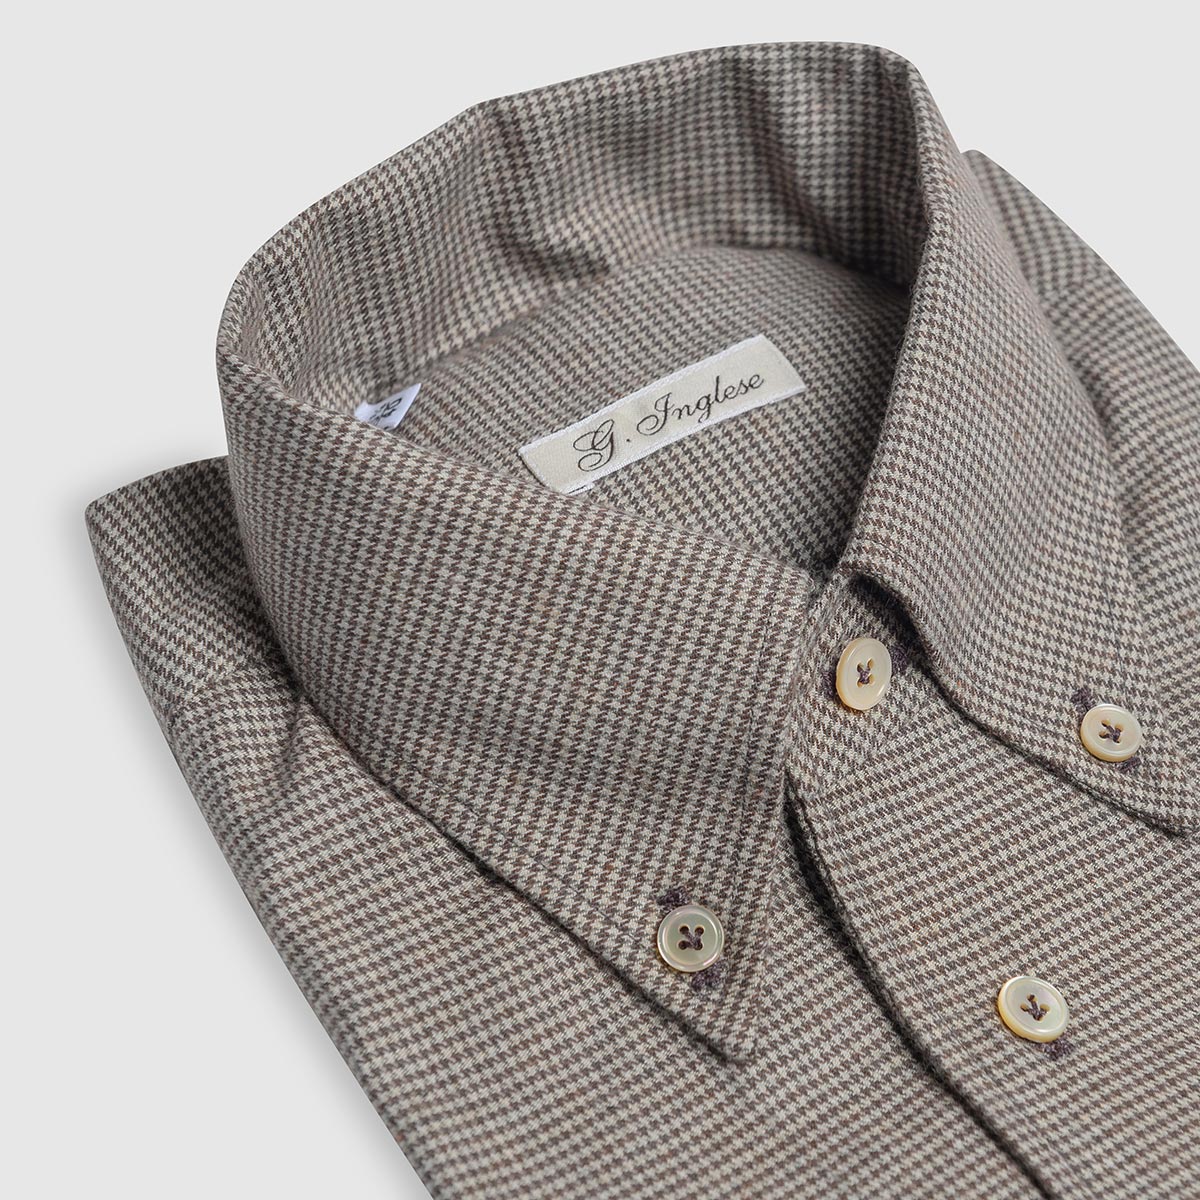 Brown/beige Cotton Vichy Check Shirt G. Inglese on sale 2022 2